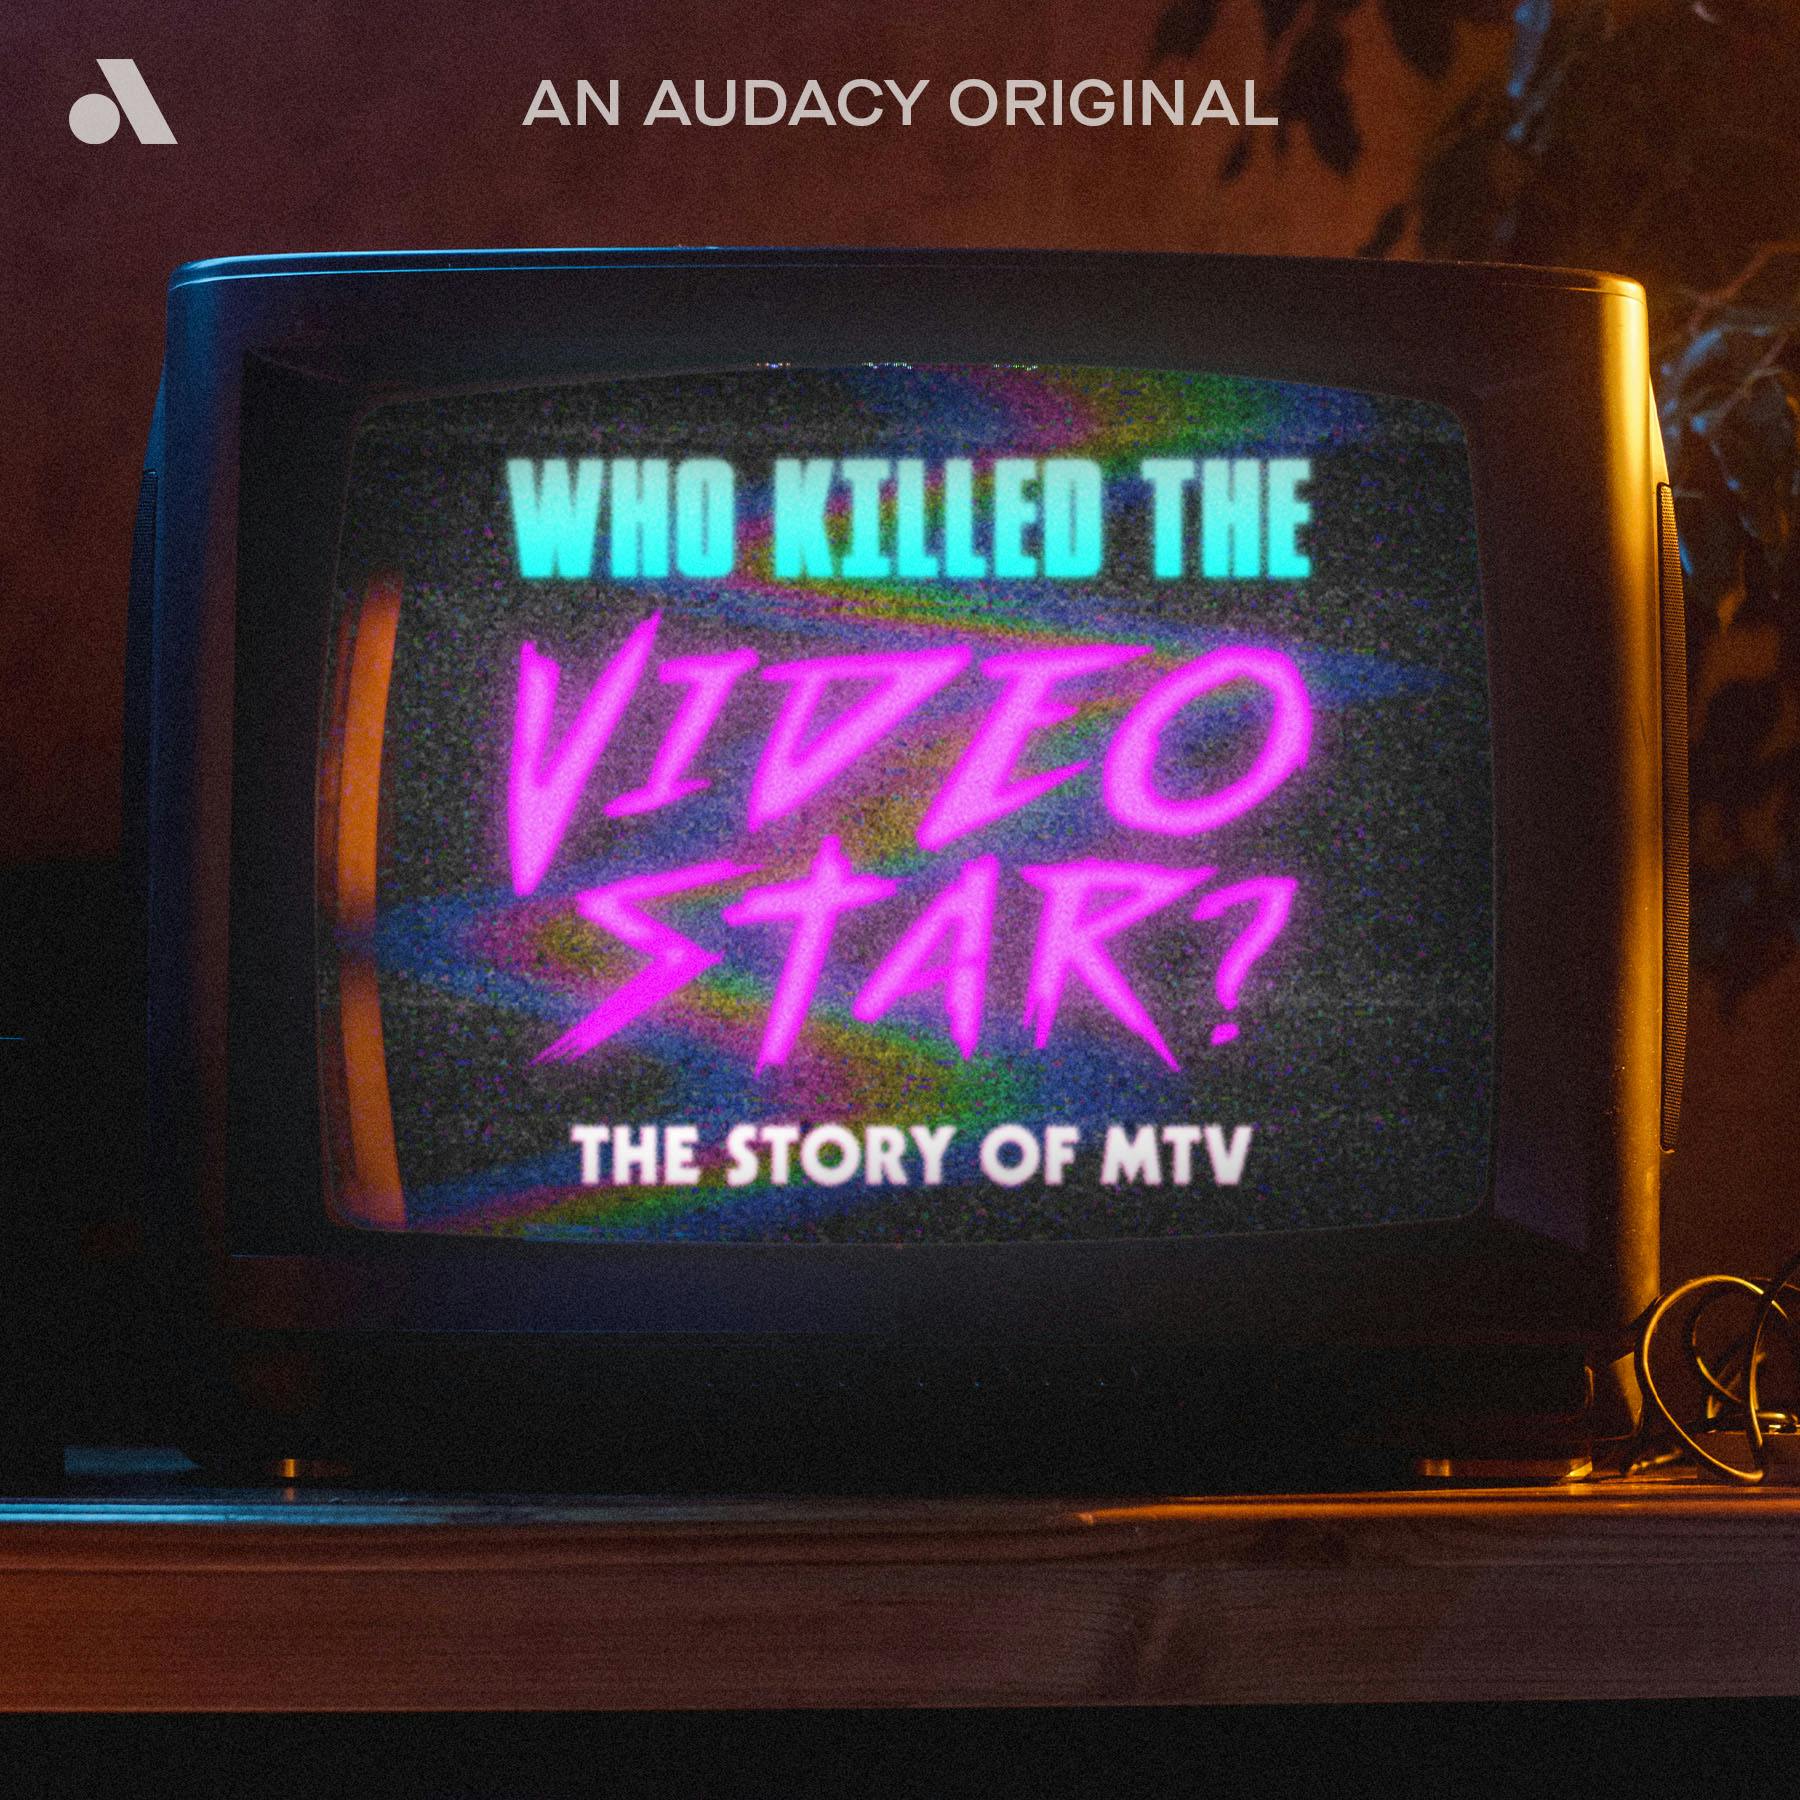 Who Killed the Video Star: The Story of MTV podcast show image